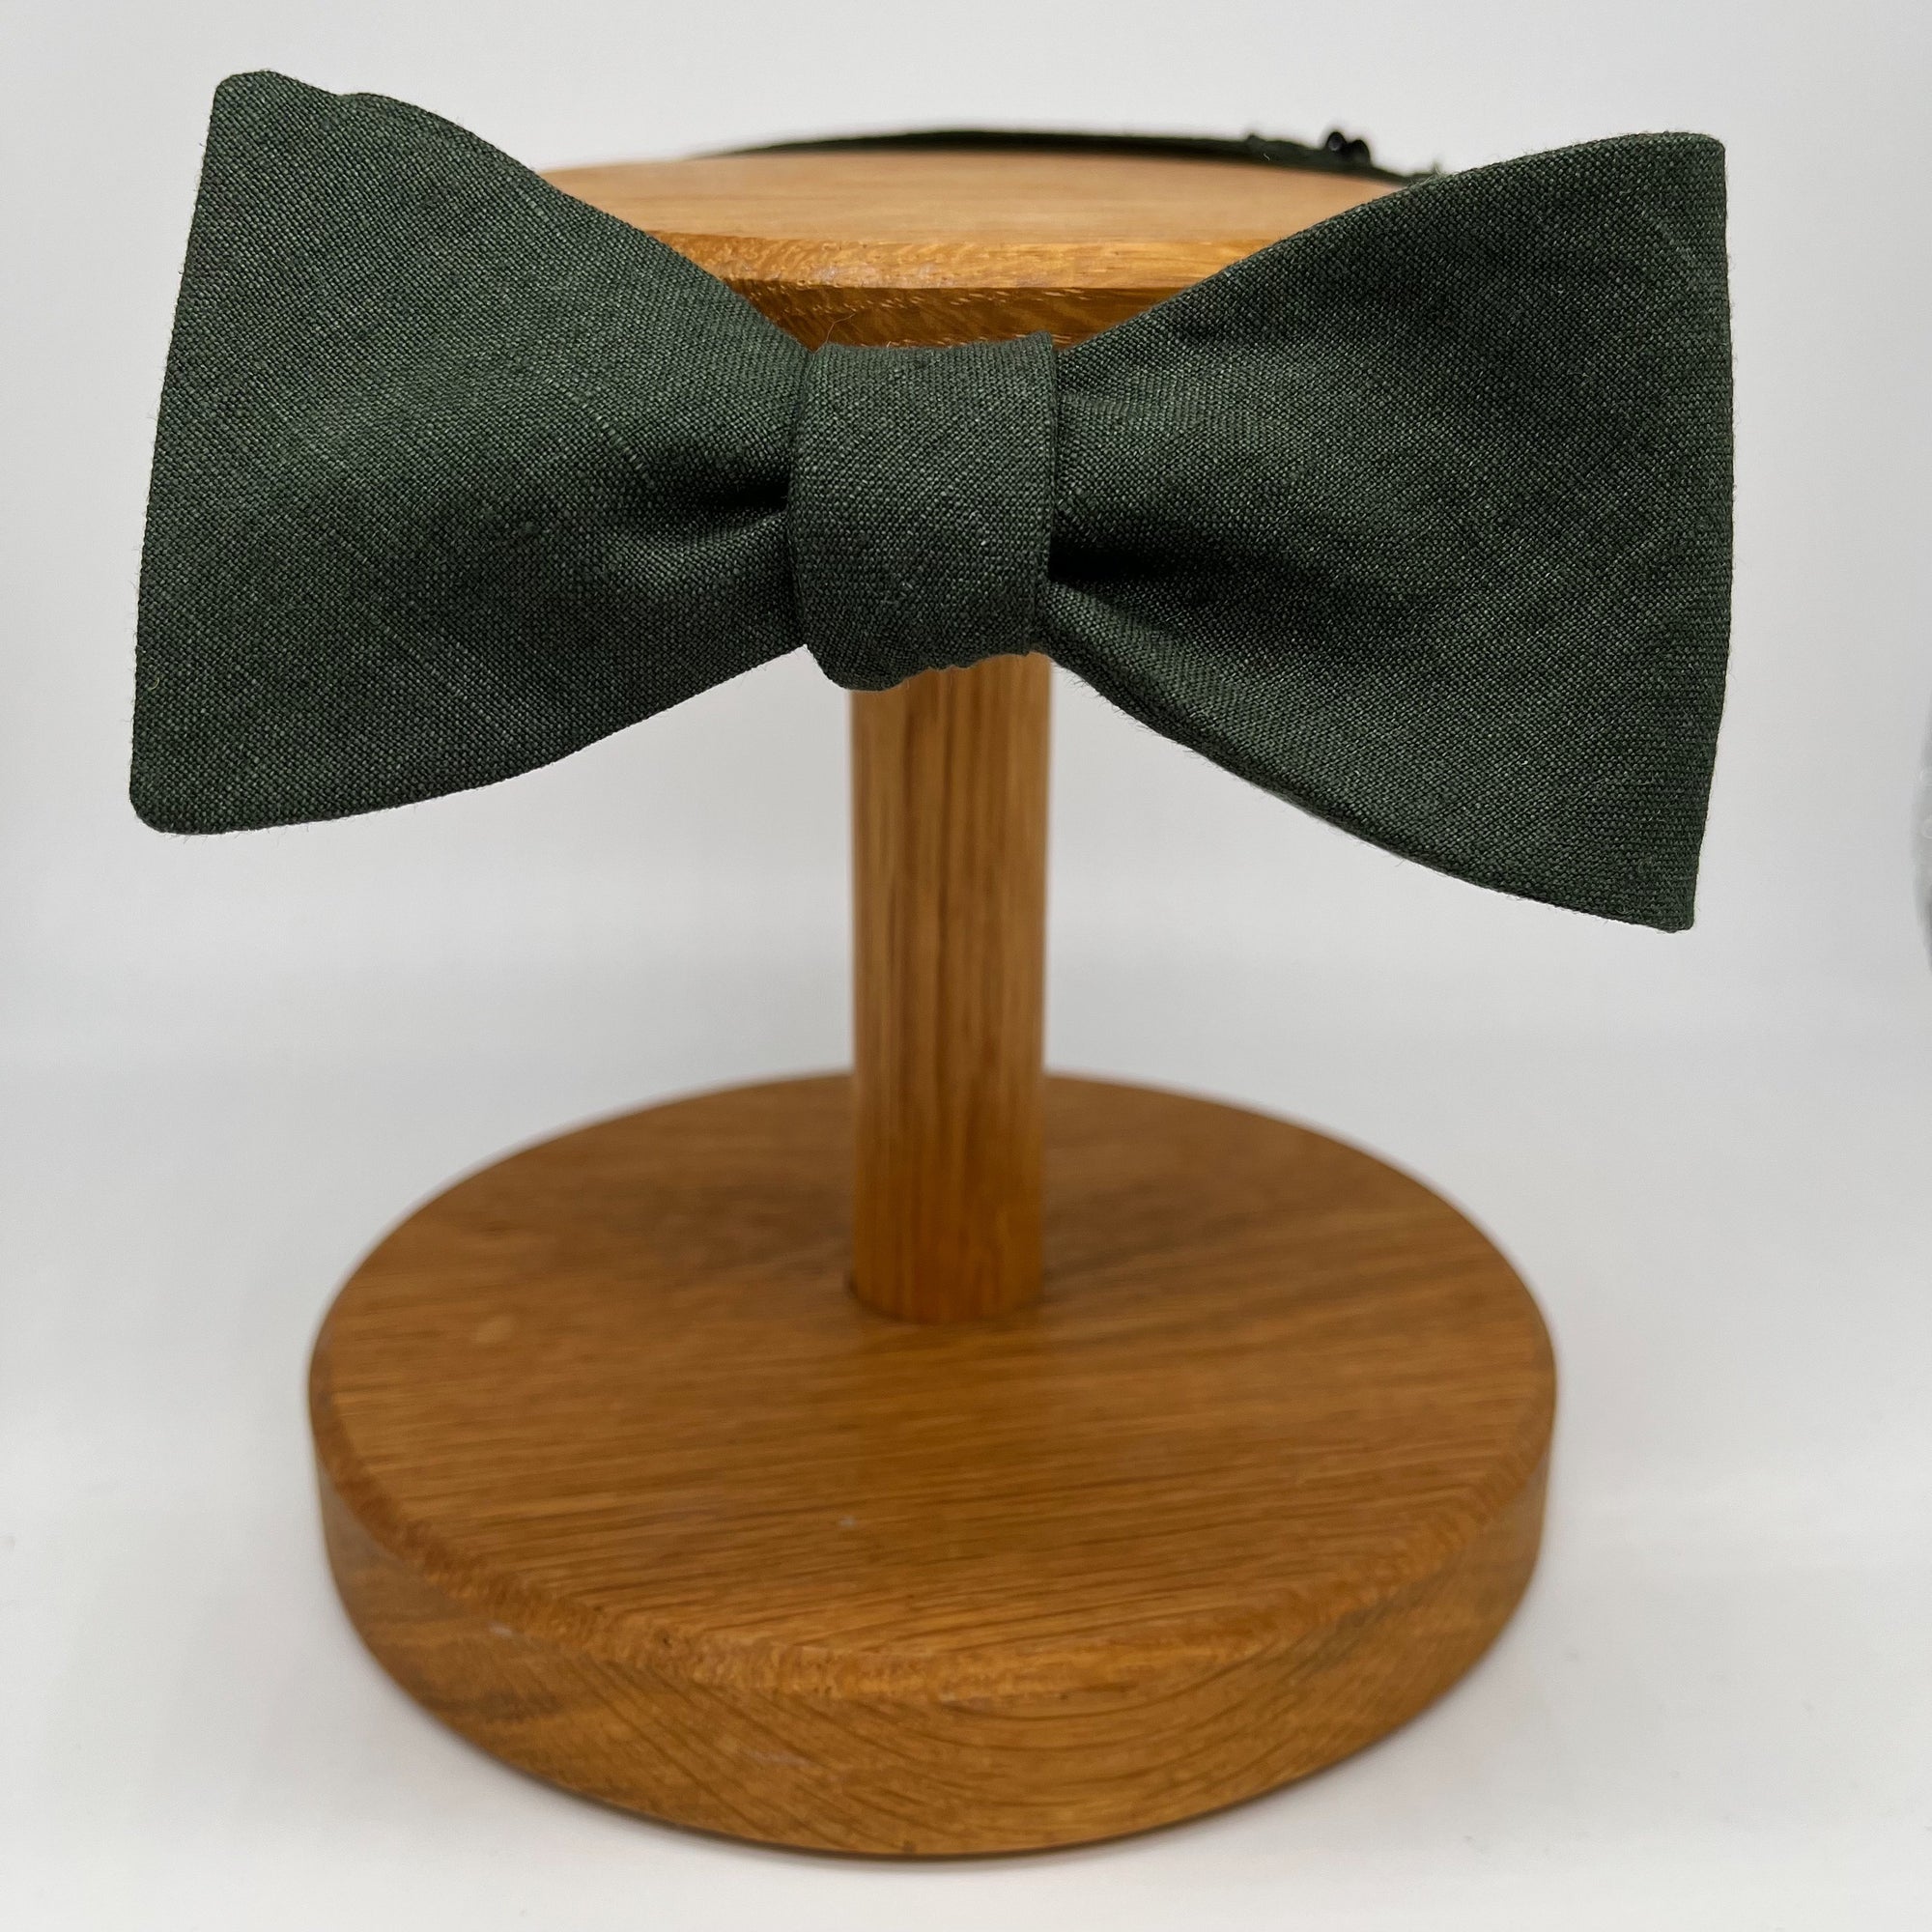 self-tie bow tie in ivy green irish linen by the belfast bow company